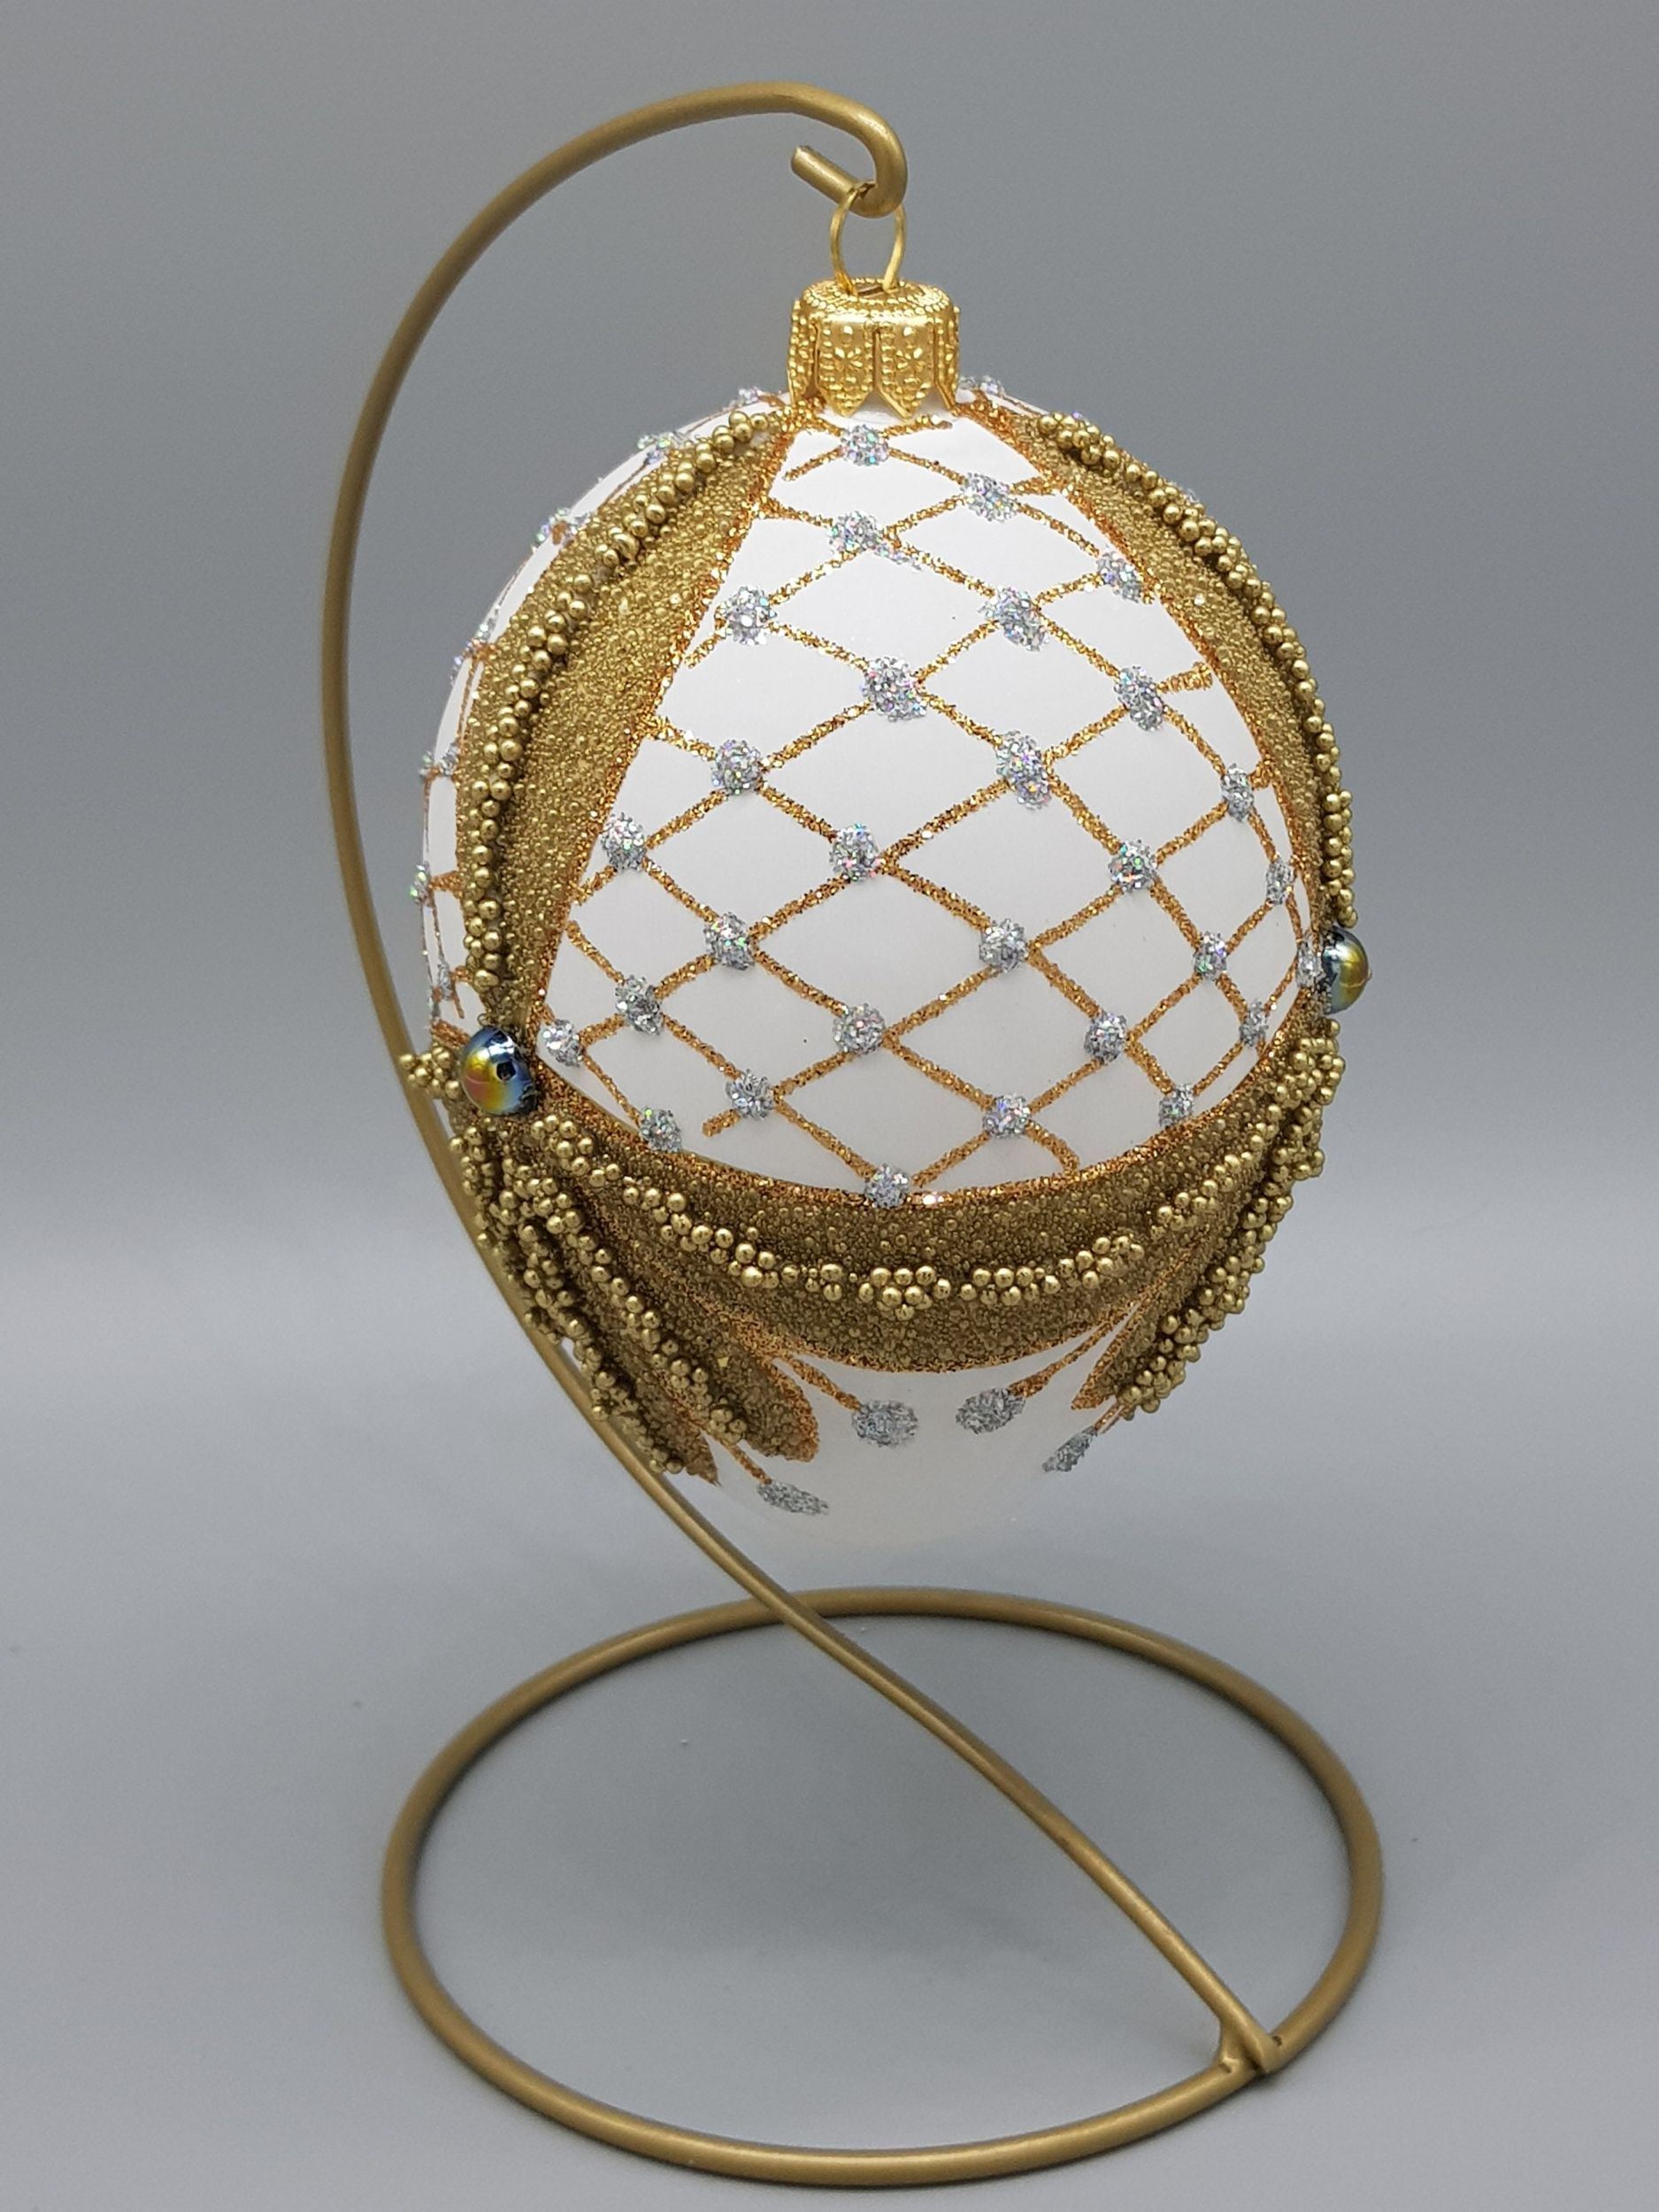 WHITE AND GOLD FABERGE EGG